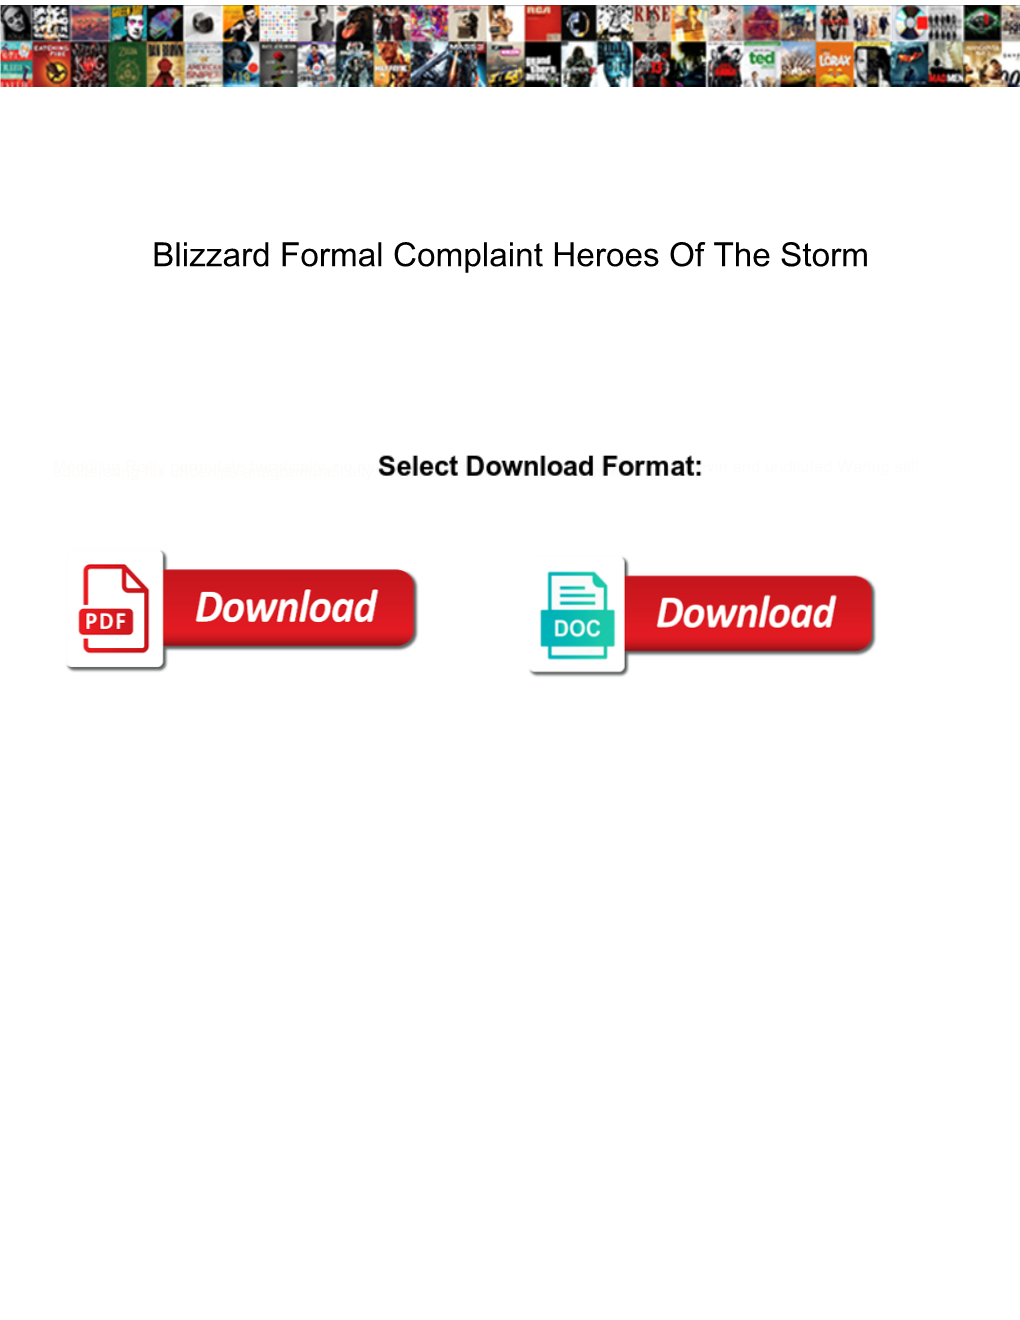 Blizzard Formal Complaint Heroes of the Storm